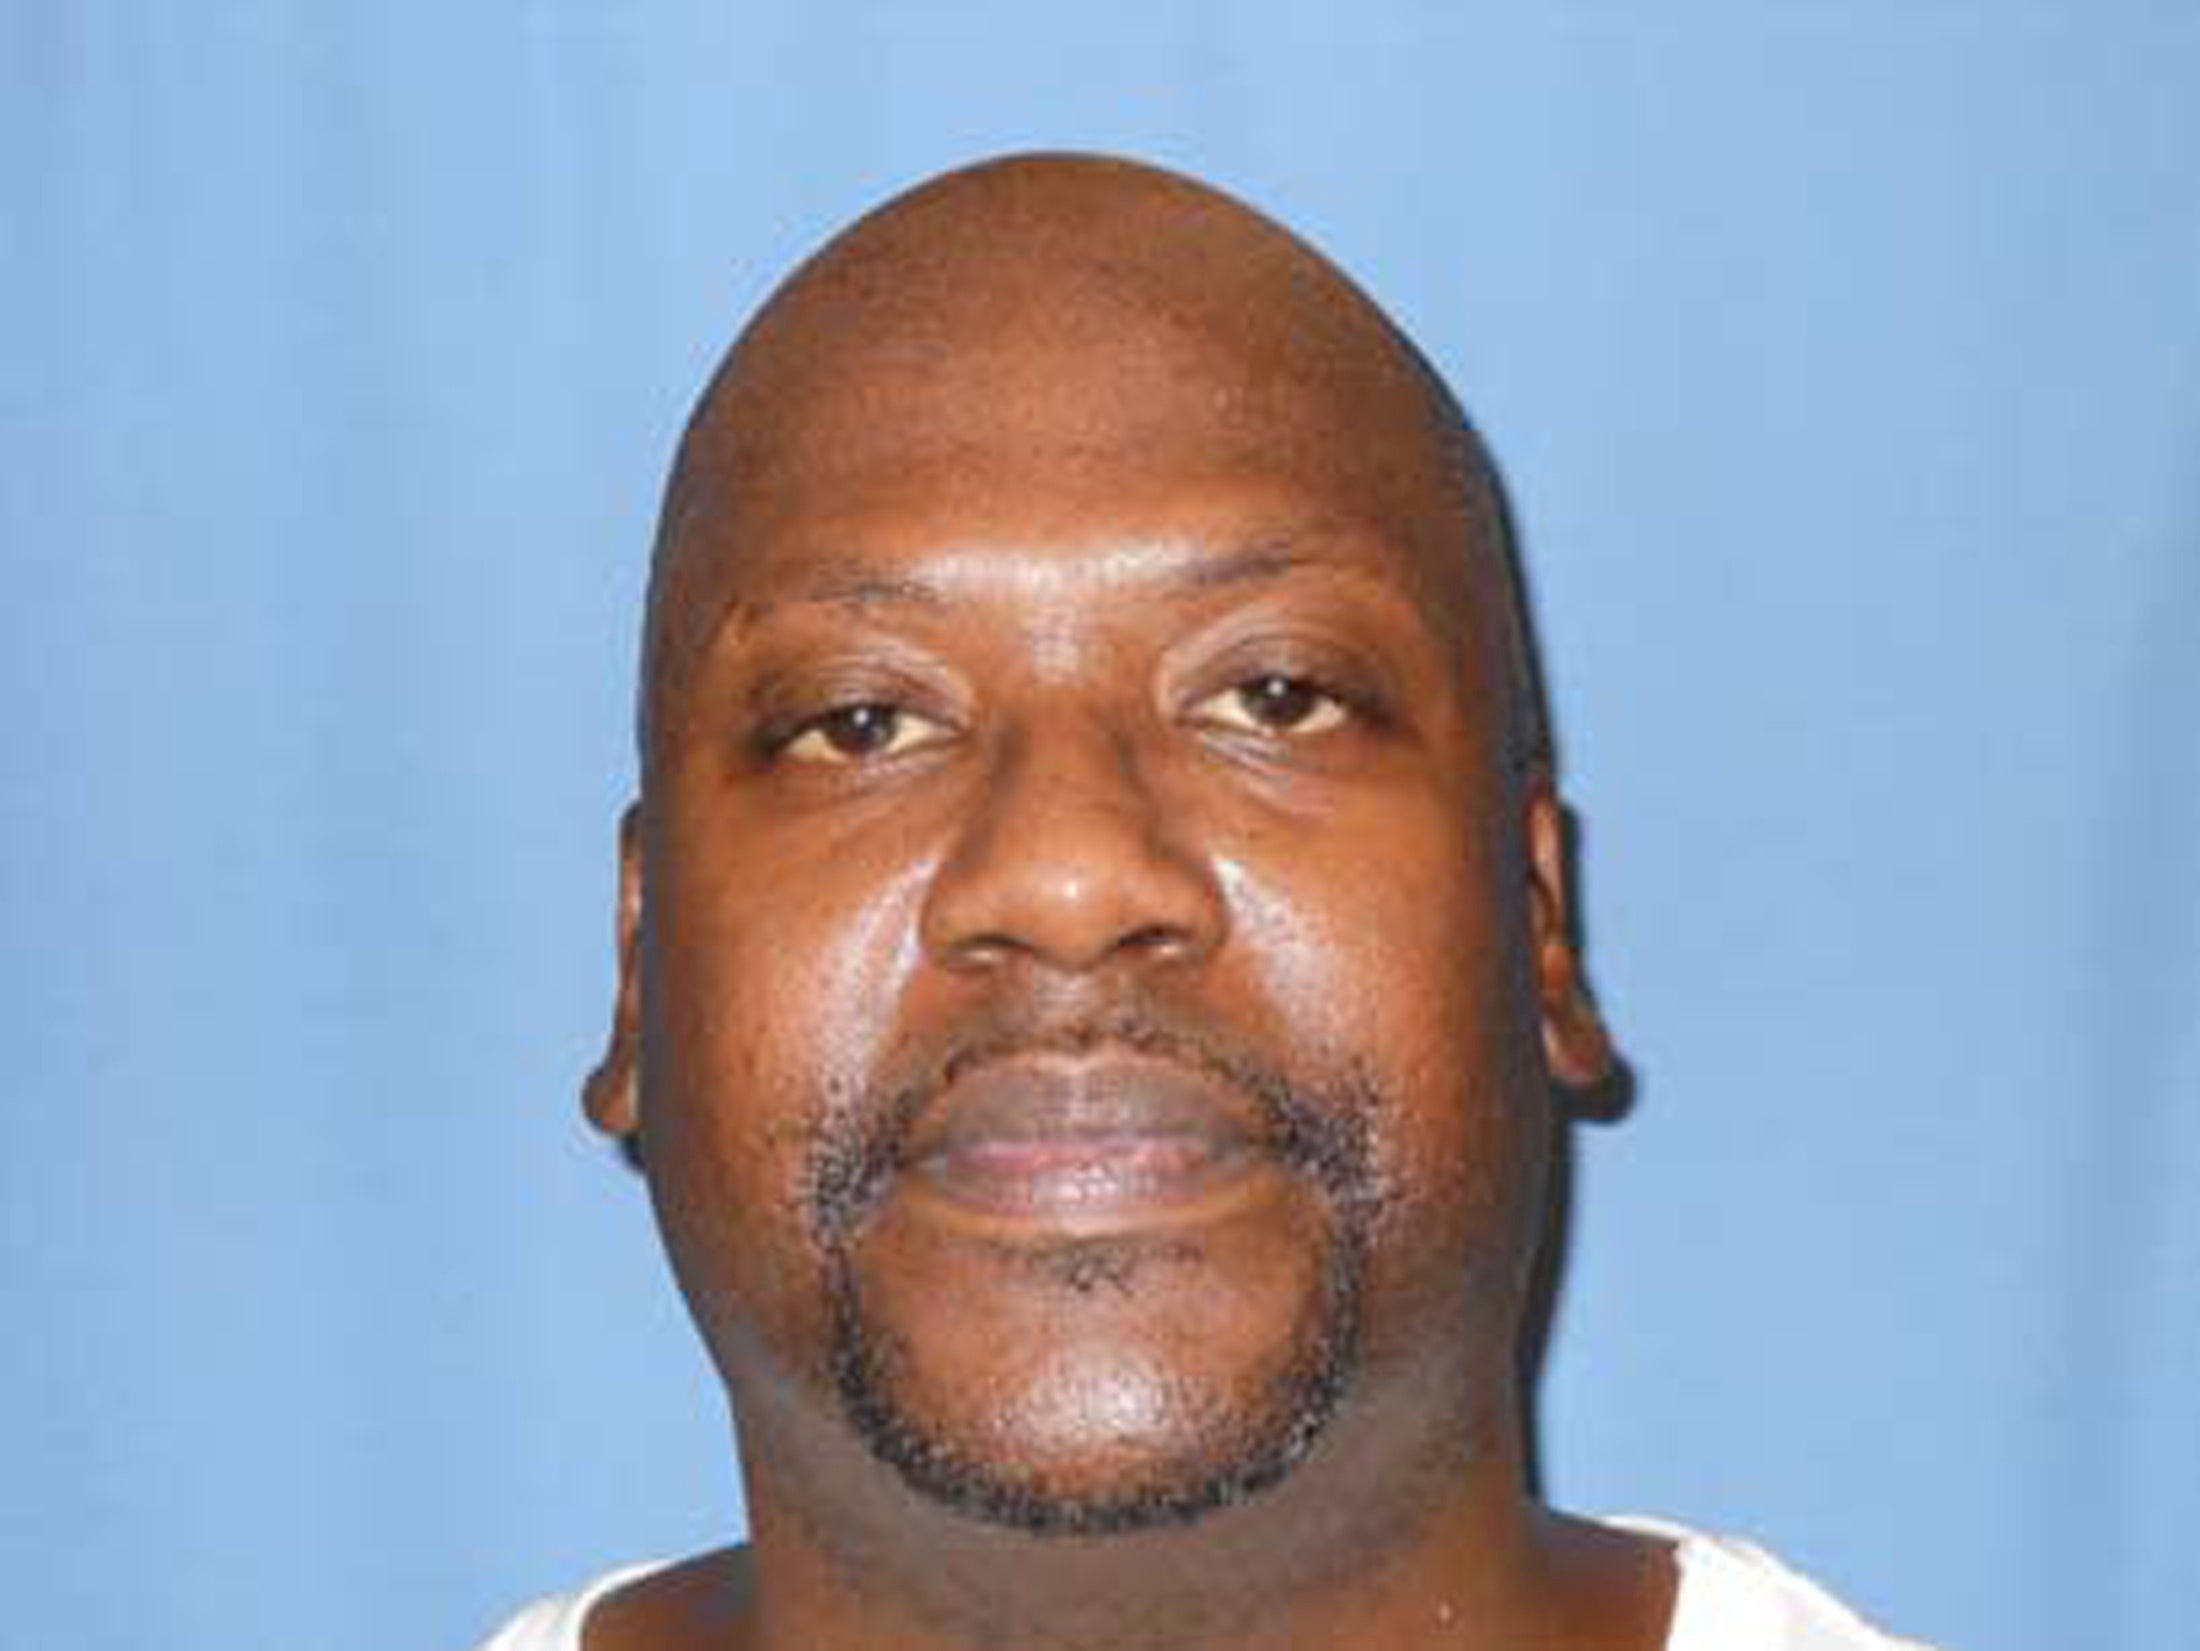 Death row inmate Curtis Flowers is seen in this Mississippi Department of Corrections photo